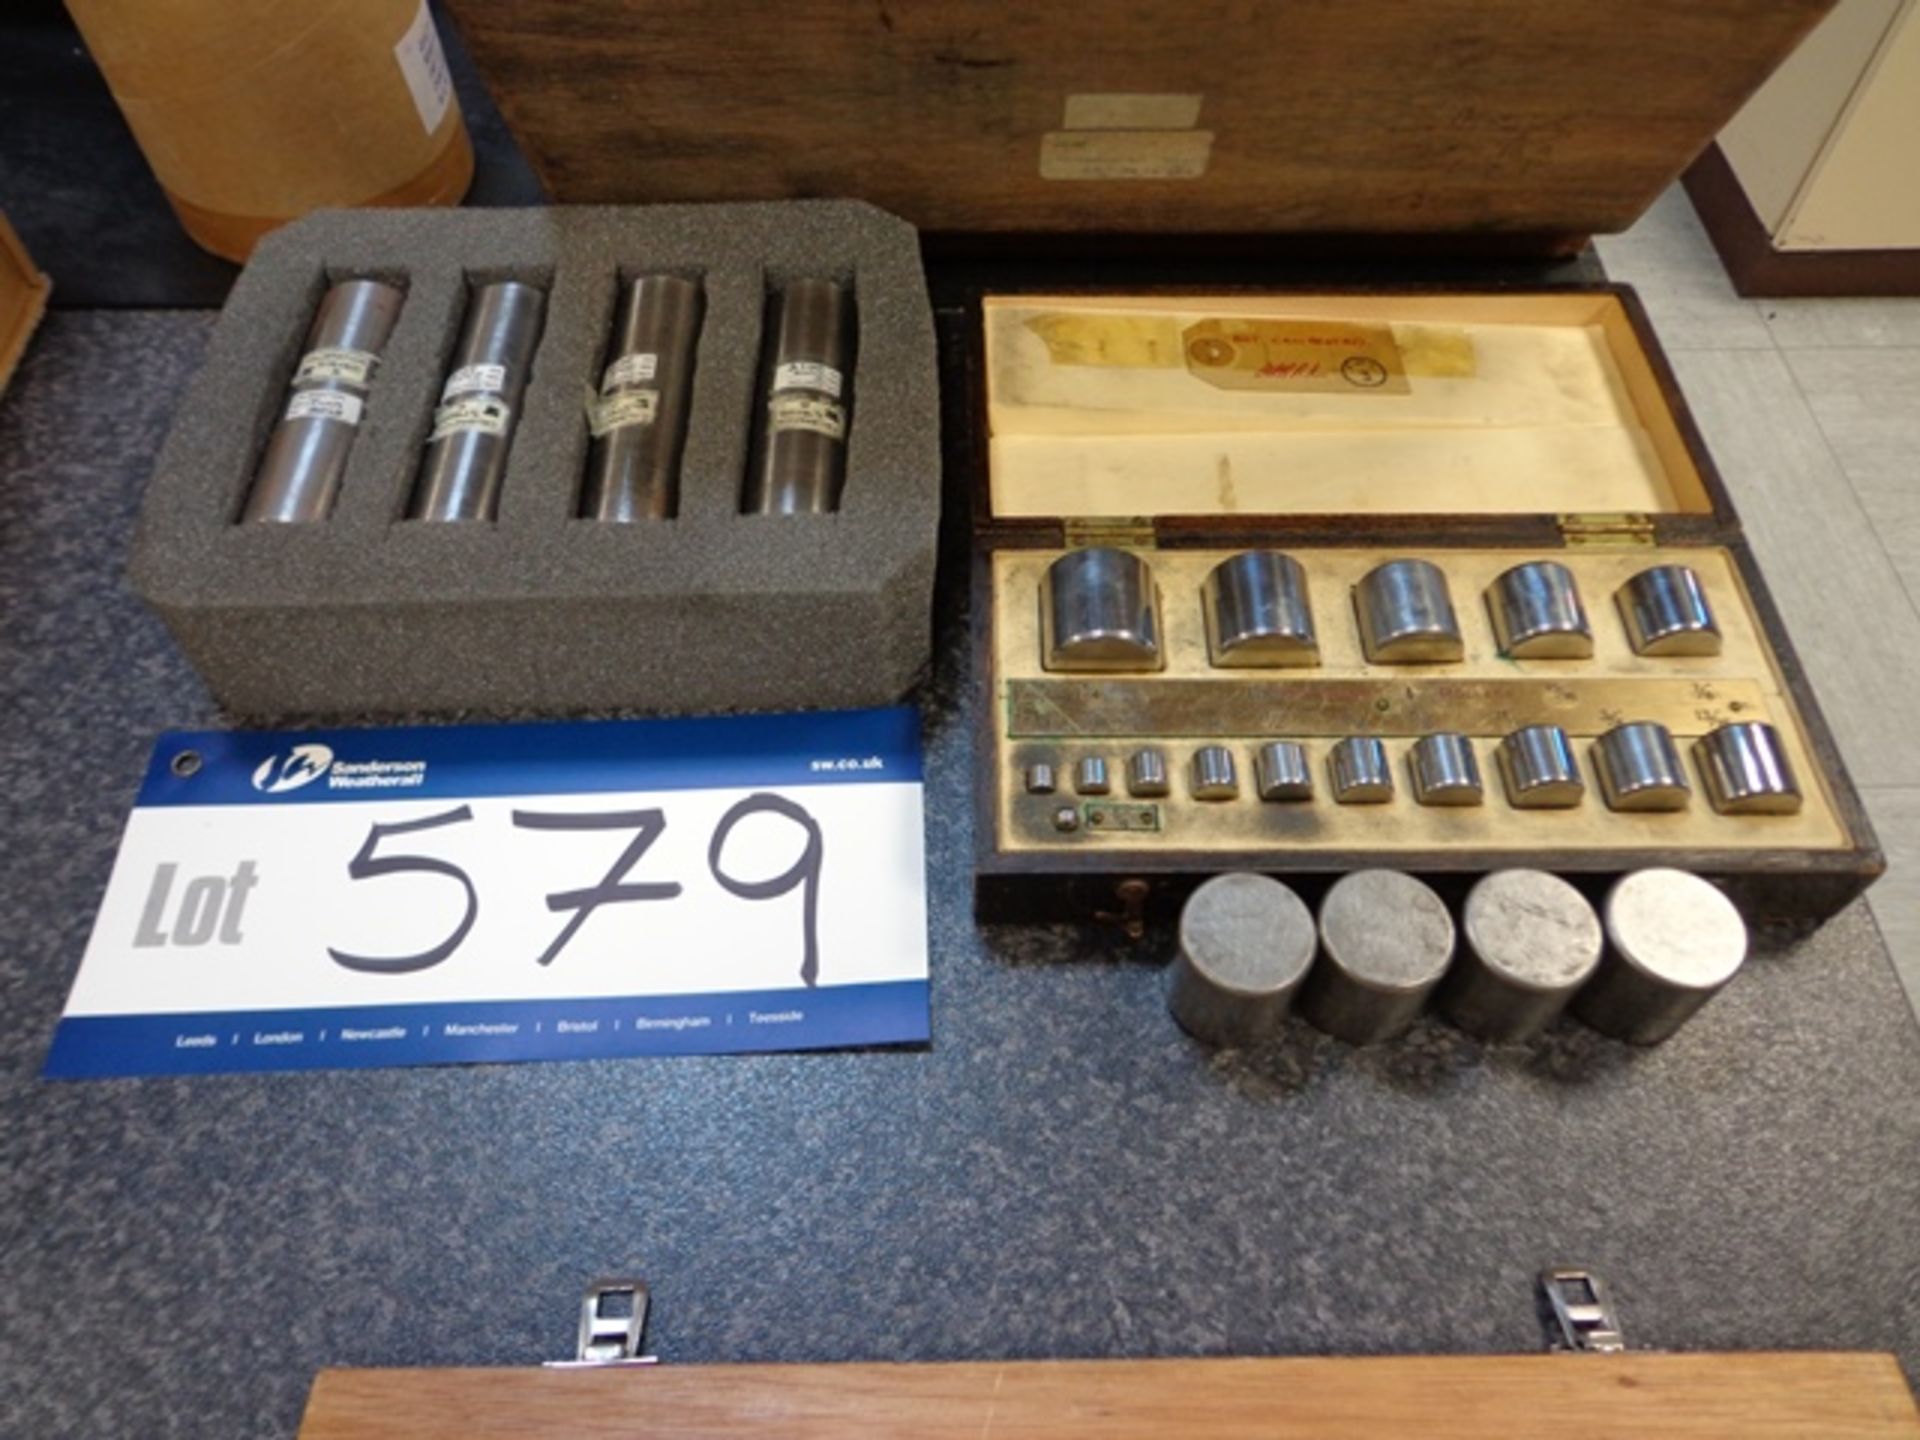 Quantity of Roller Gauges as set out